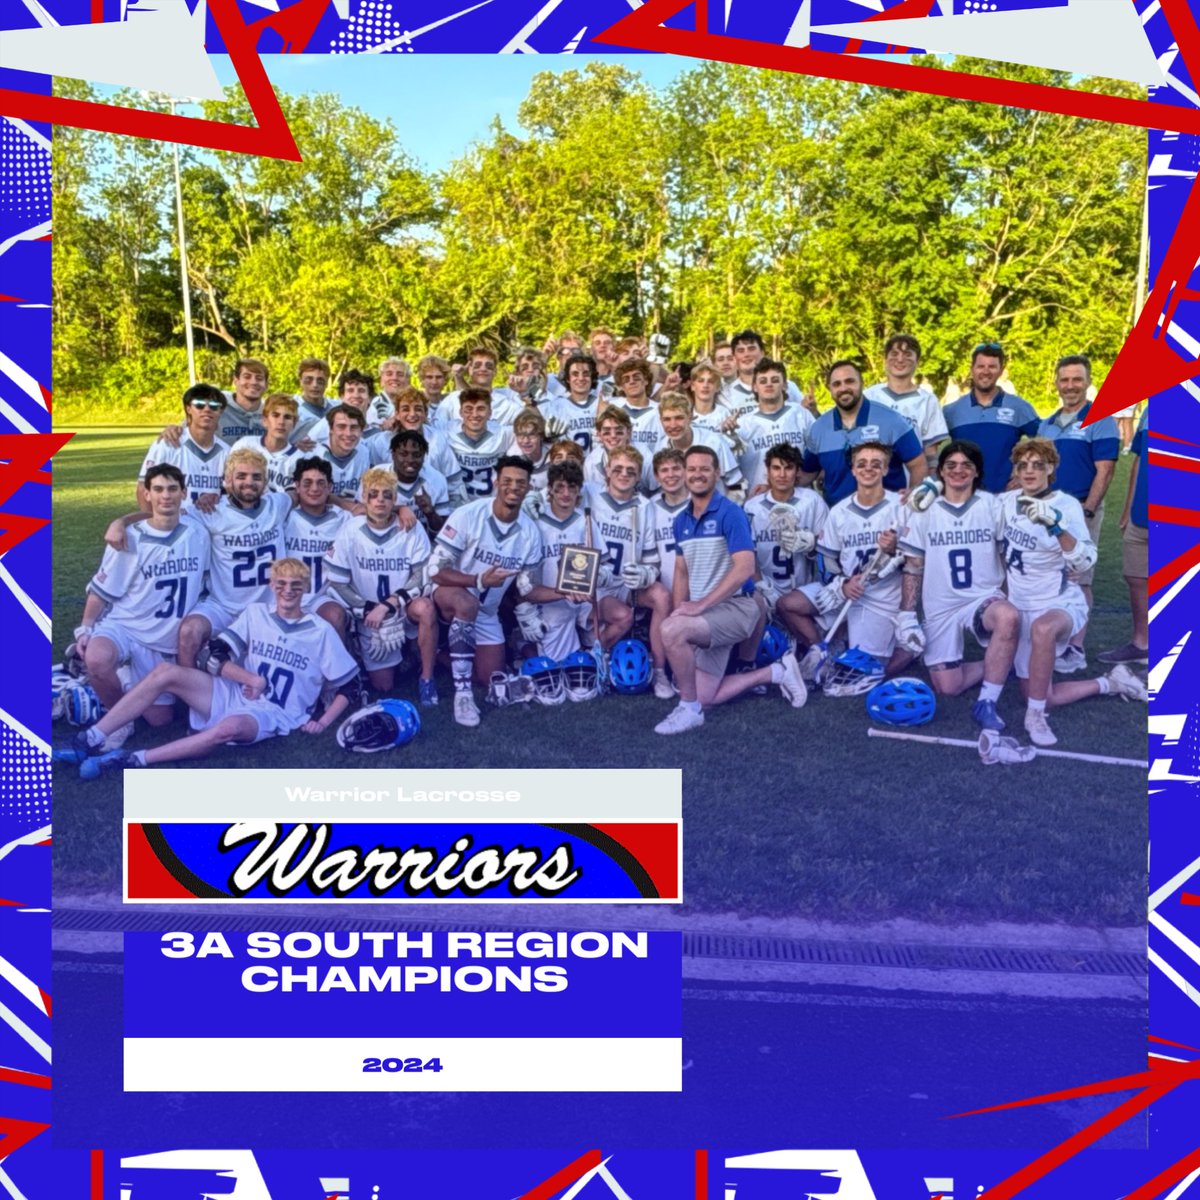 Congratulations to the boys lacrosse team on winning the 3A Soruh Region Championship. Way to go Warriors! @shs_warrior @sherwoodlax